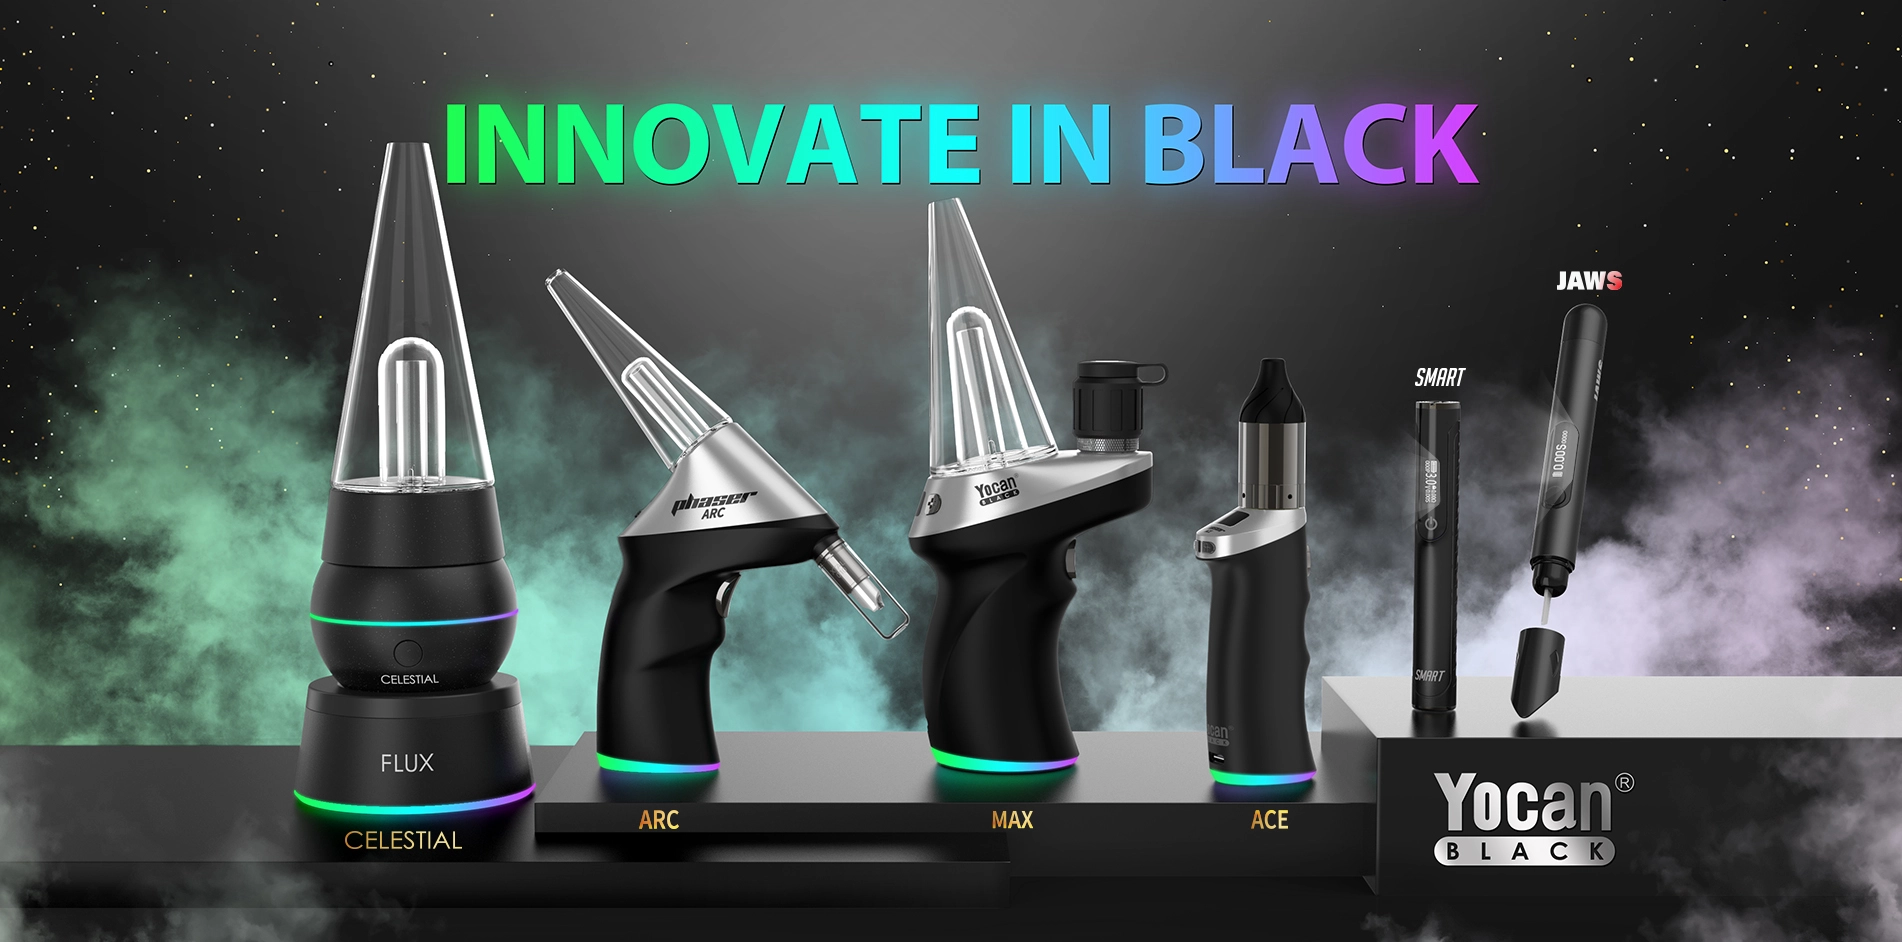 Yocan Black: A Yocan New Brand Launched